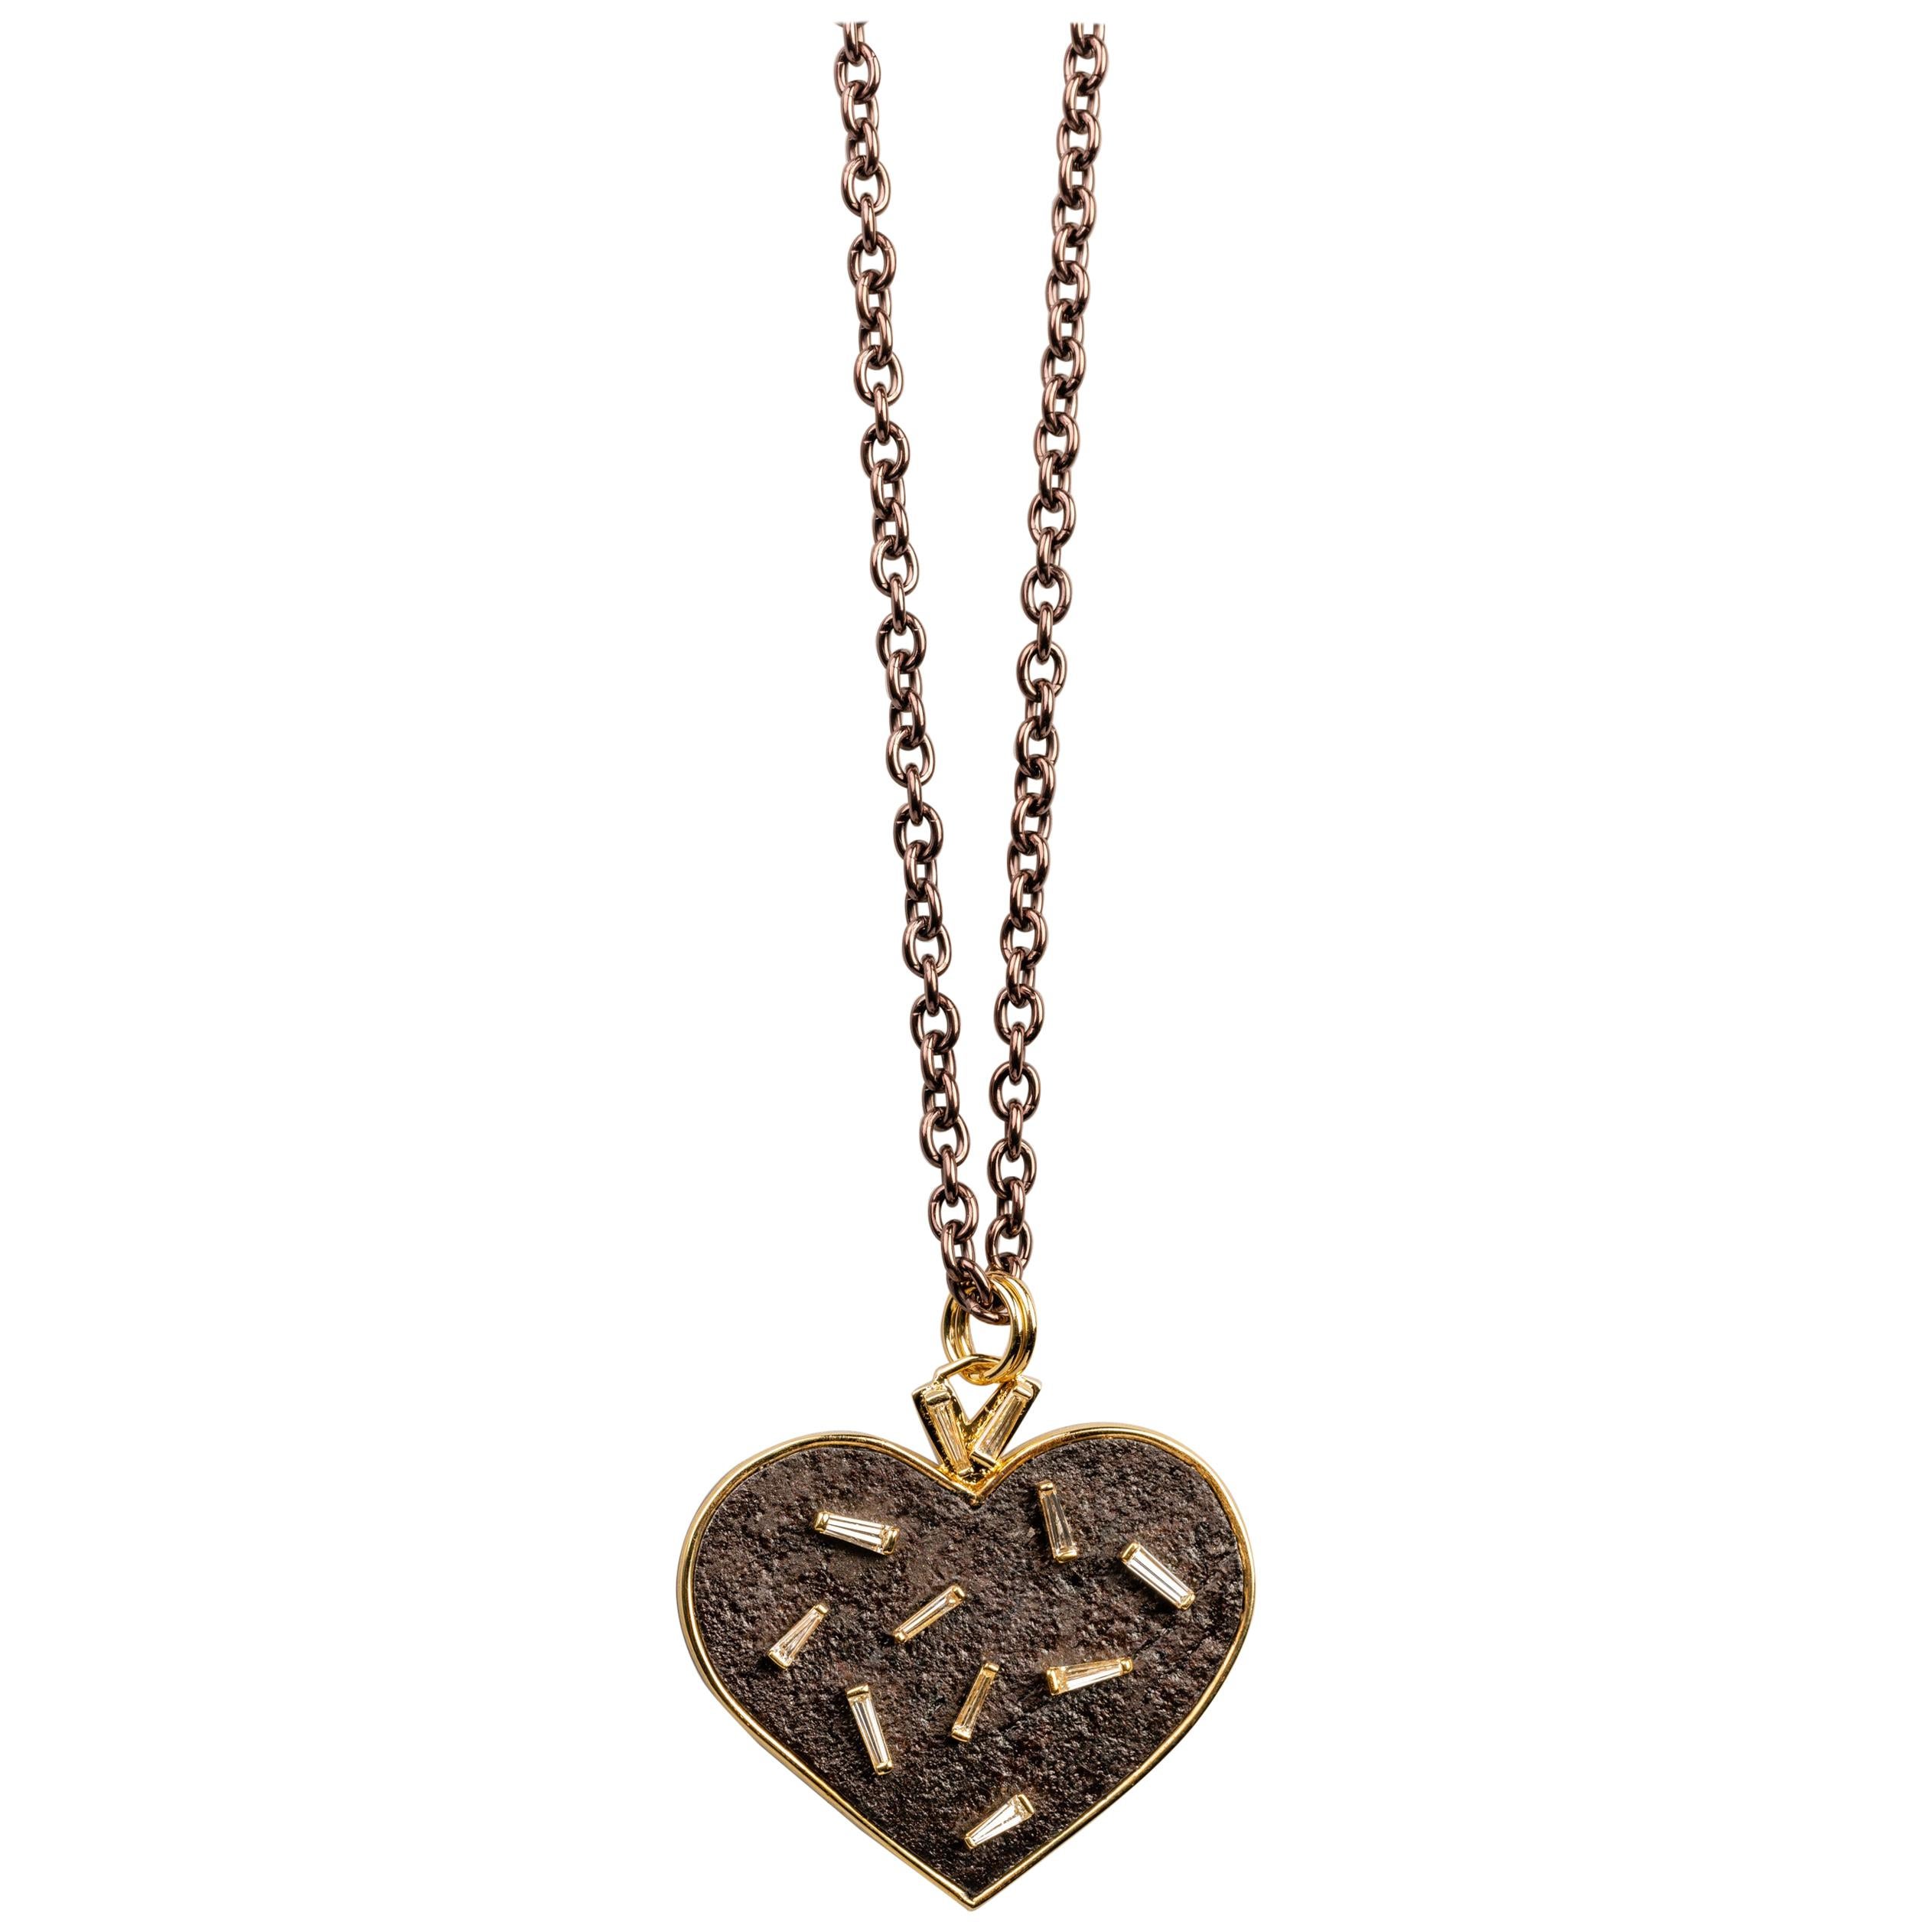 18 Karat, Sterling Silver, and Rusted Iron Heart Necklace with Baguette Diamonds